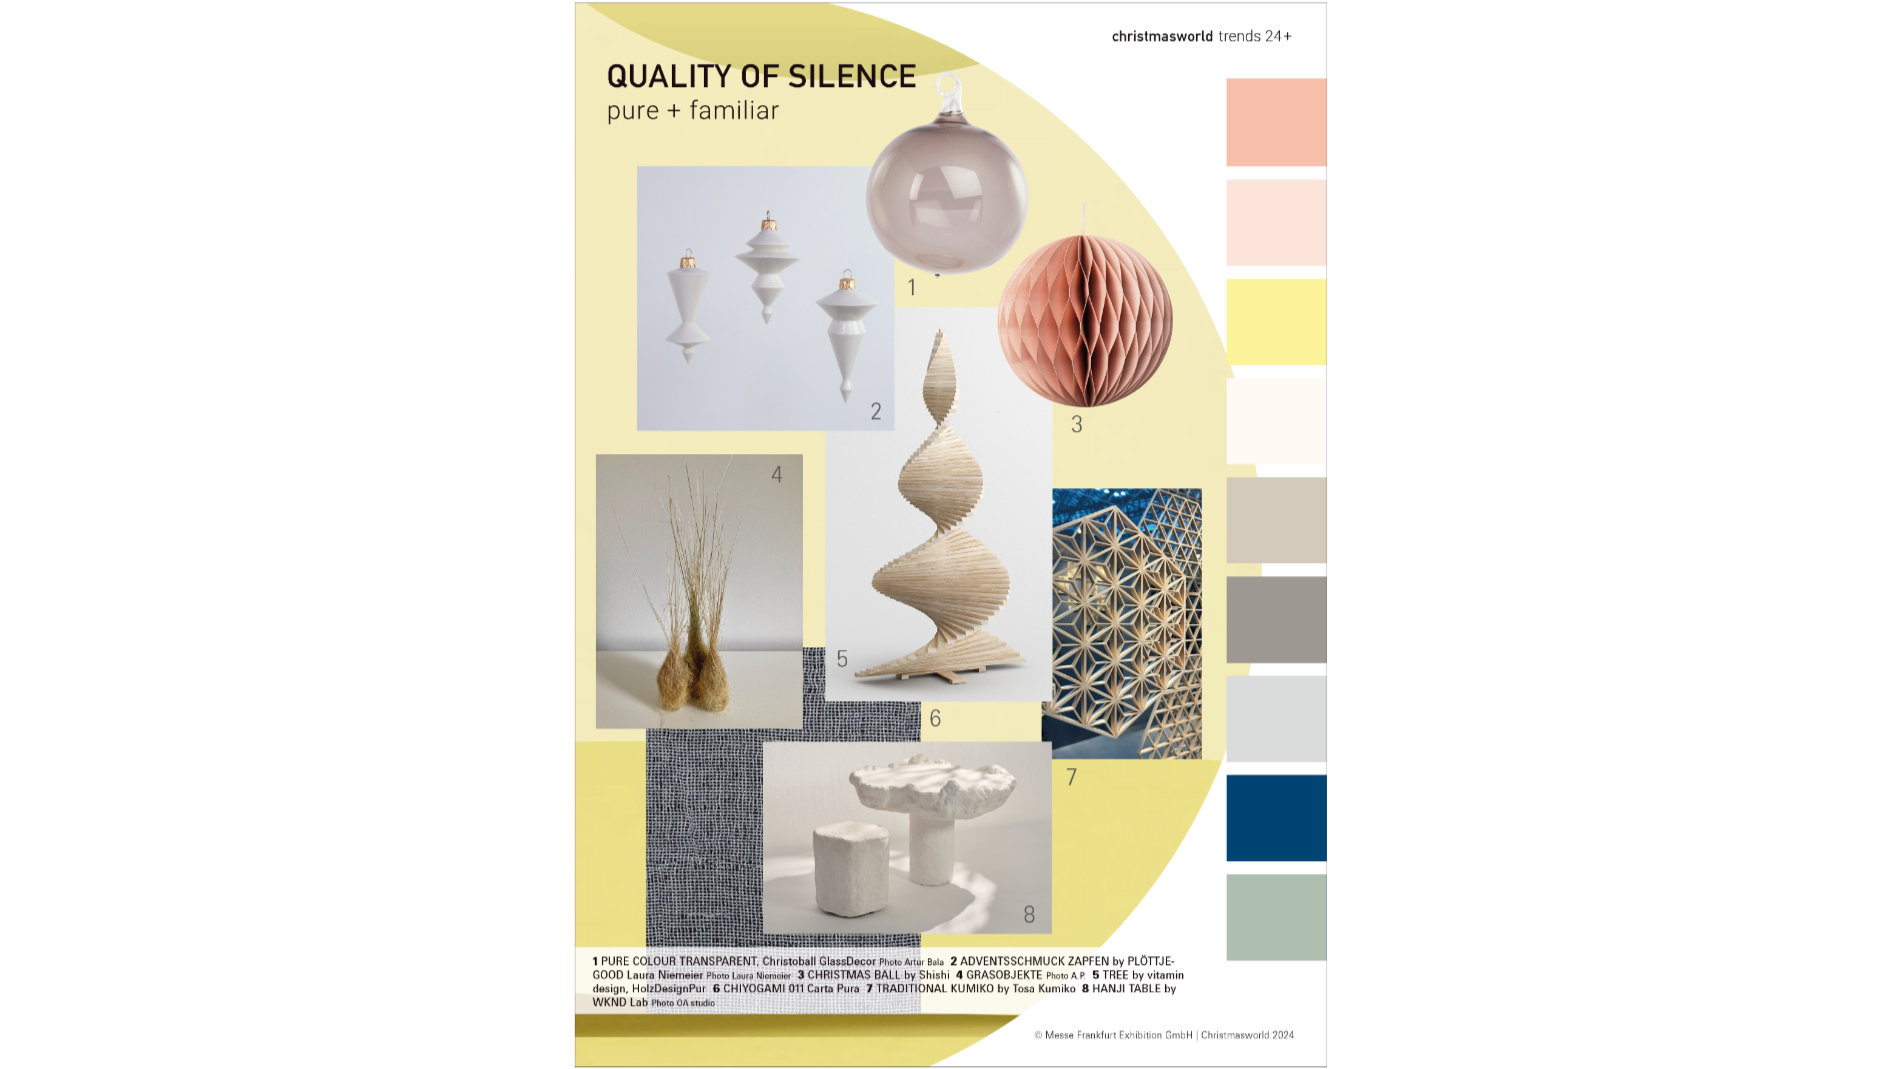 QUALITY OF SILENCE_pure+familiar reflects the ever-growing awareness of mental and physical well-being with designs that are close to nature. Graphic: Messe Frankfurt.